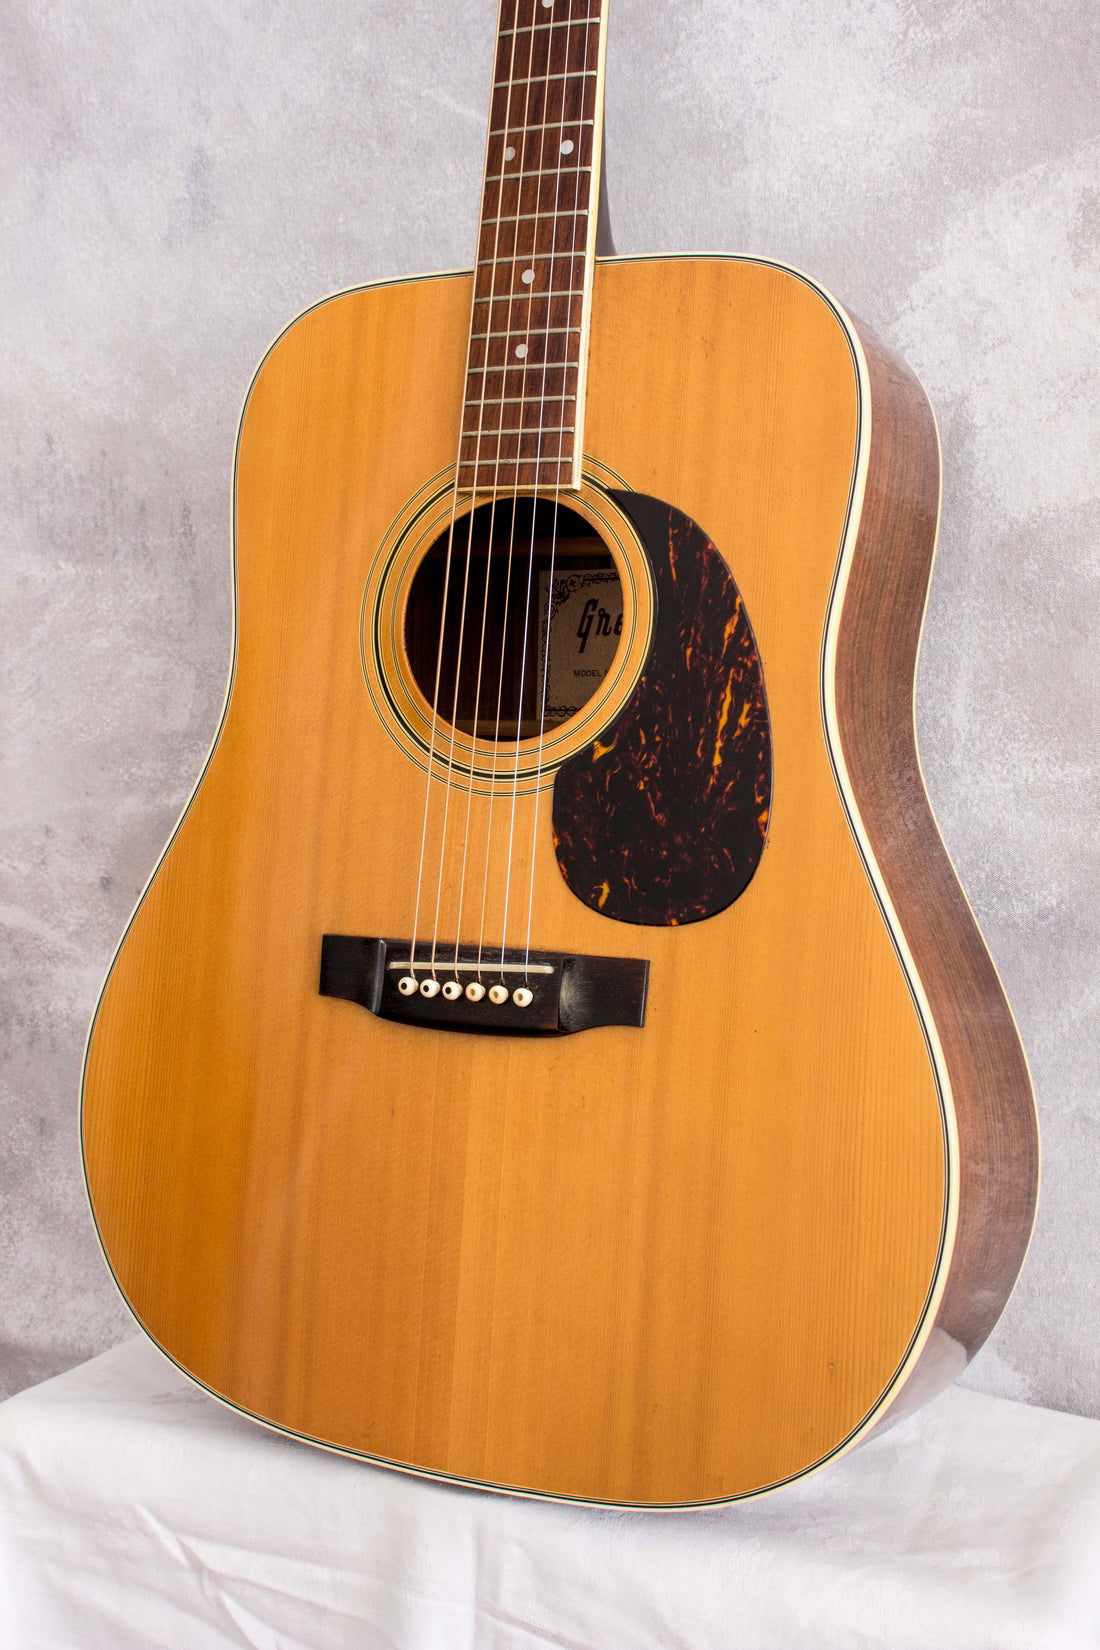 Greco F-250 Dreadnought Acoustic 1974 – Topshelf Instruments